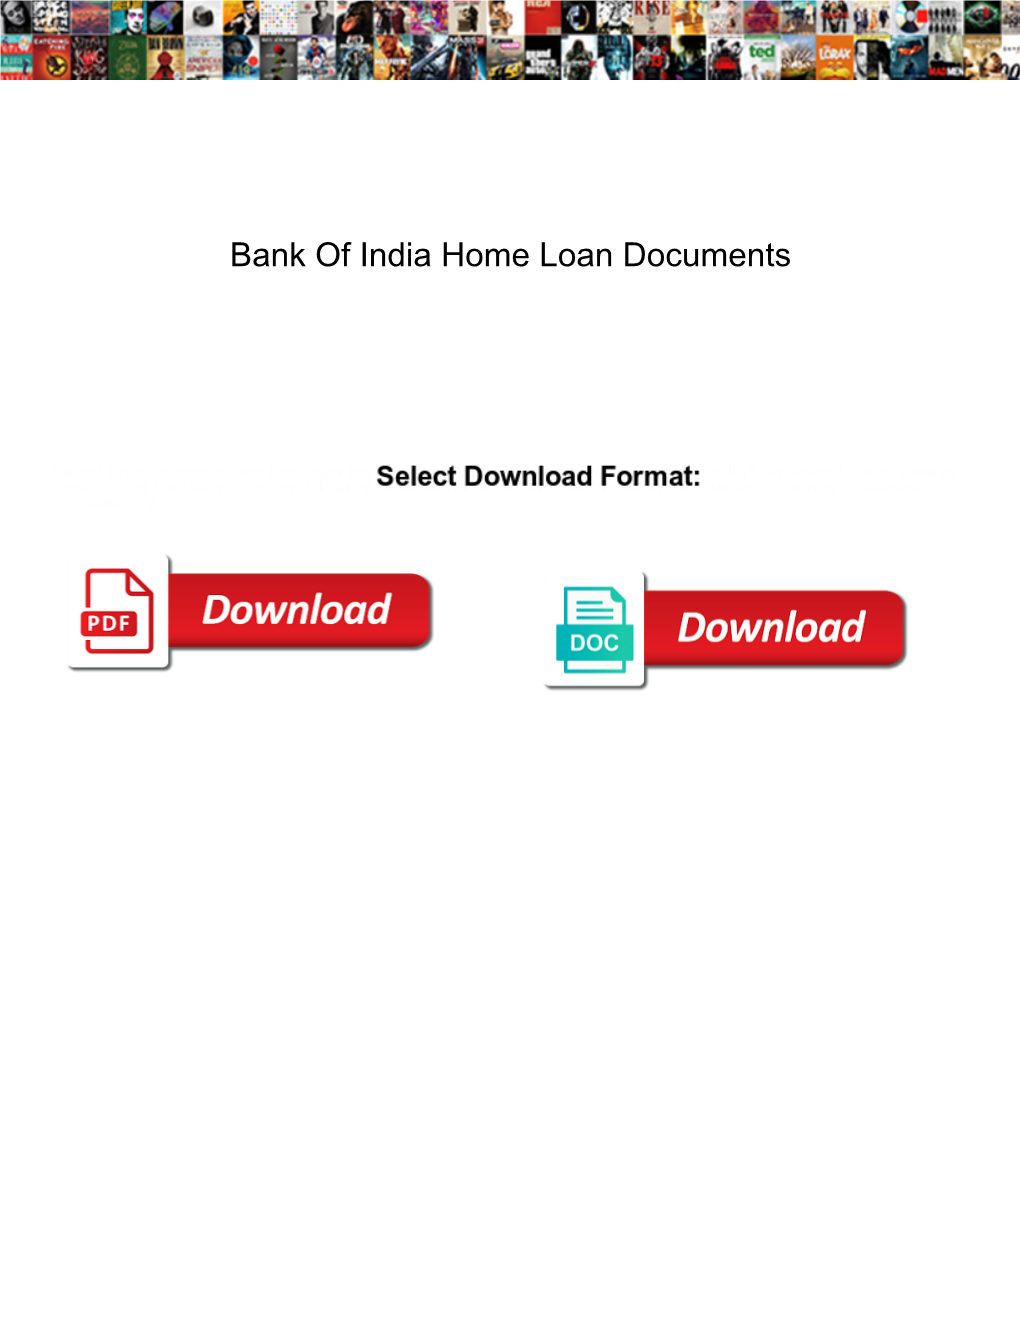 Bank of India Home Loan Documents